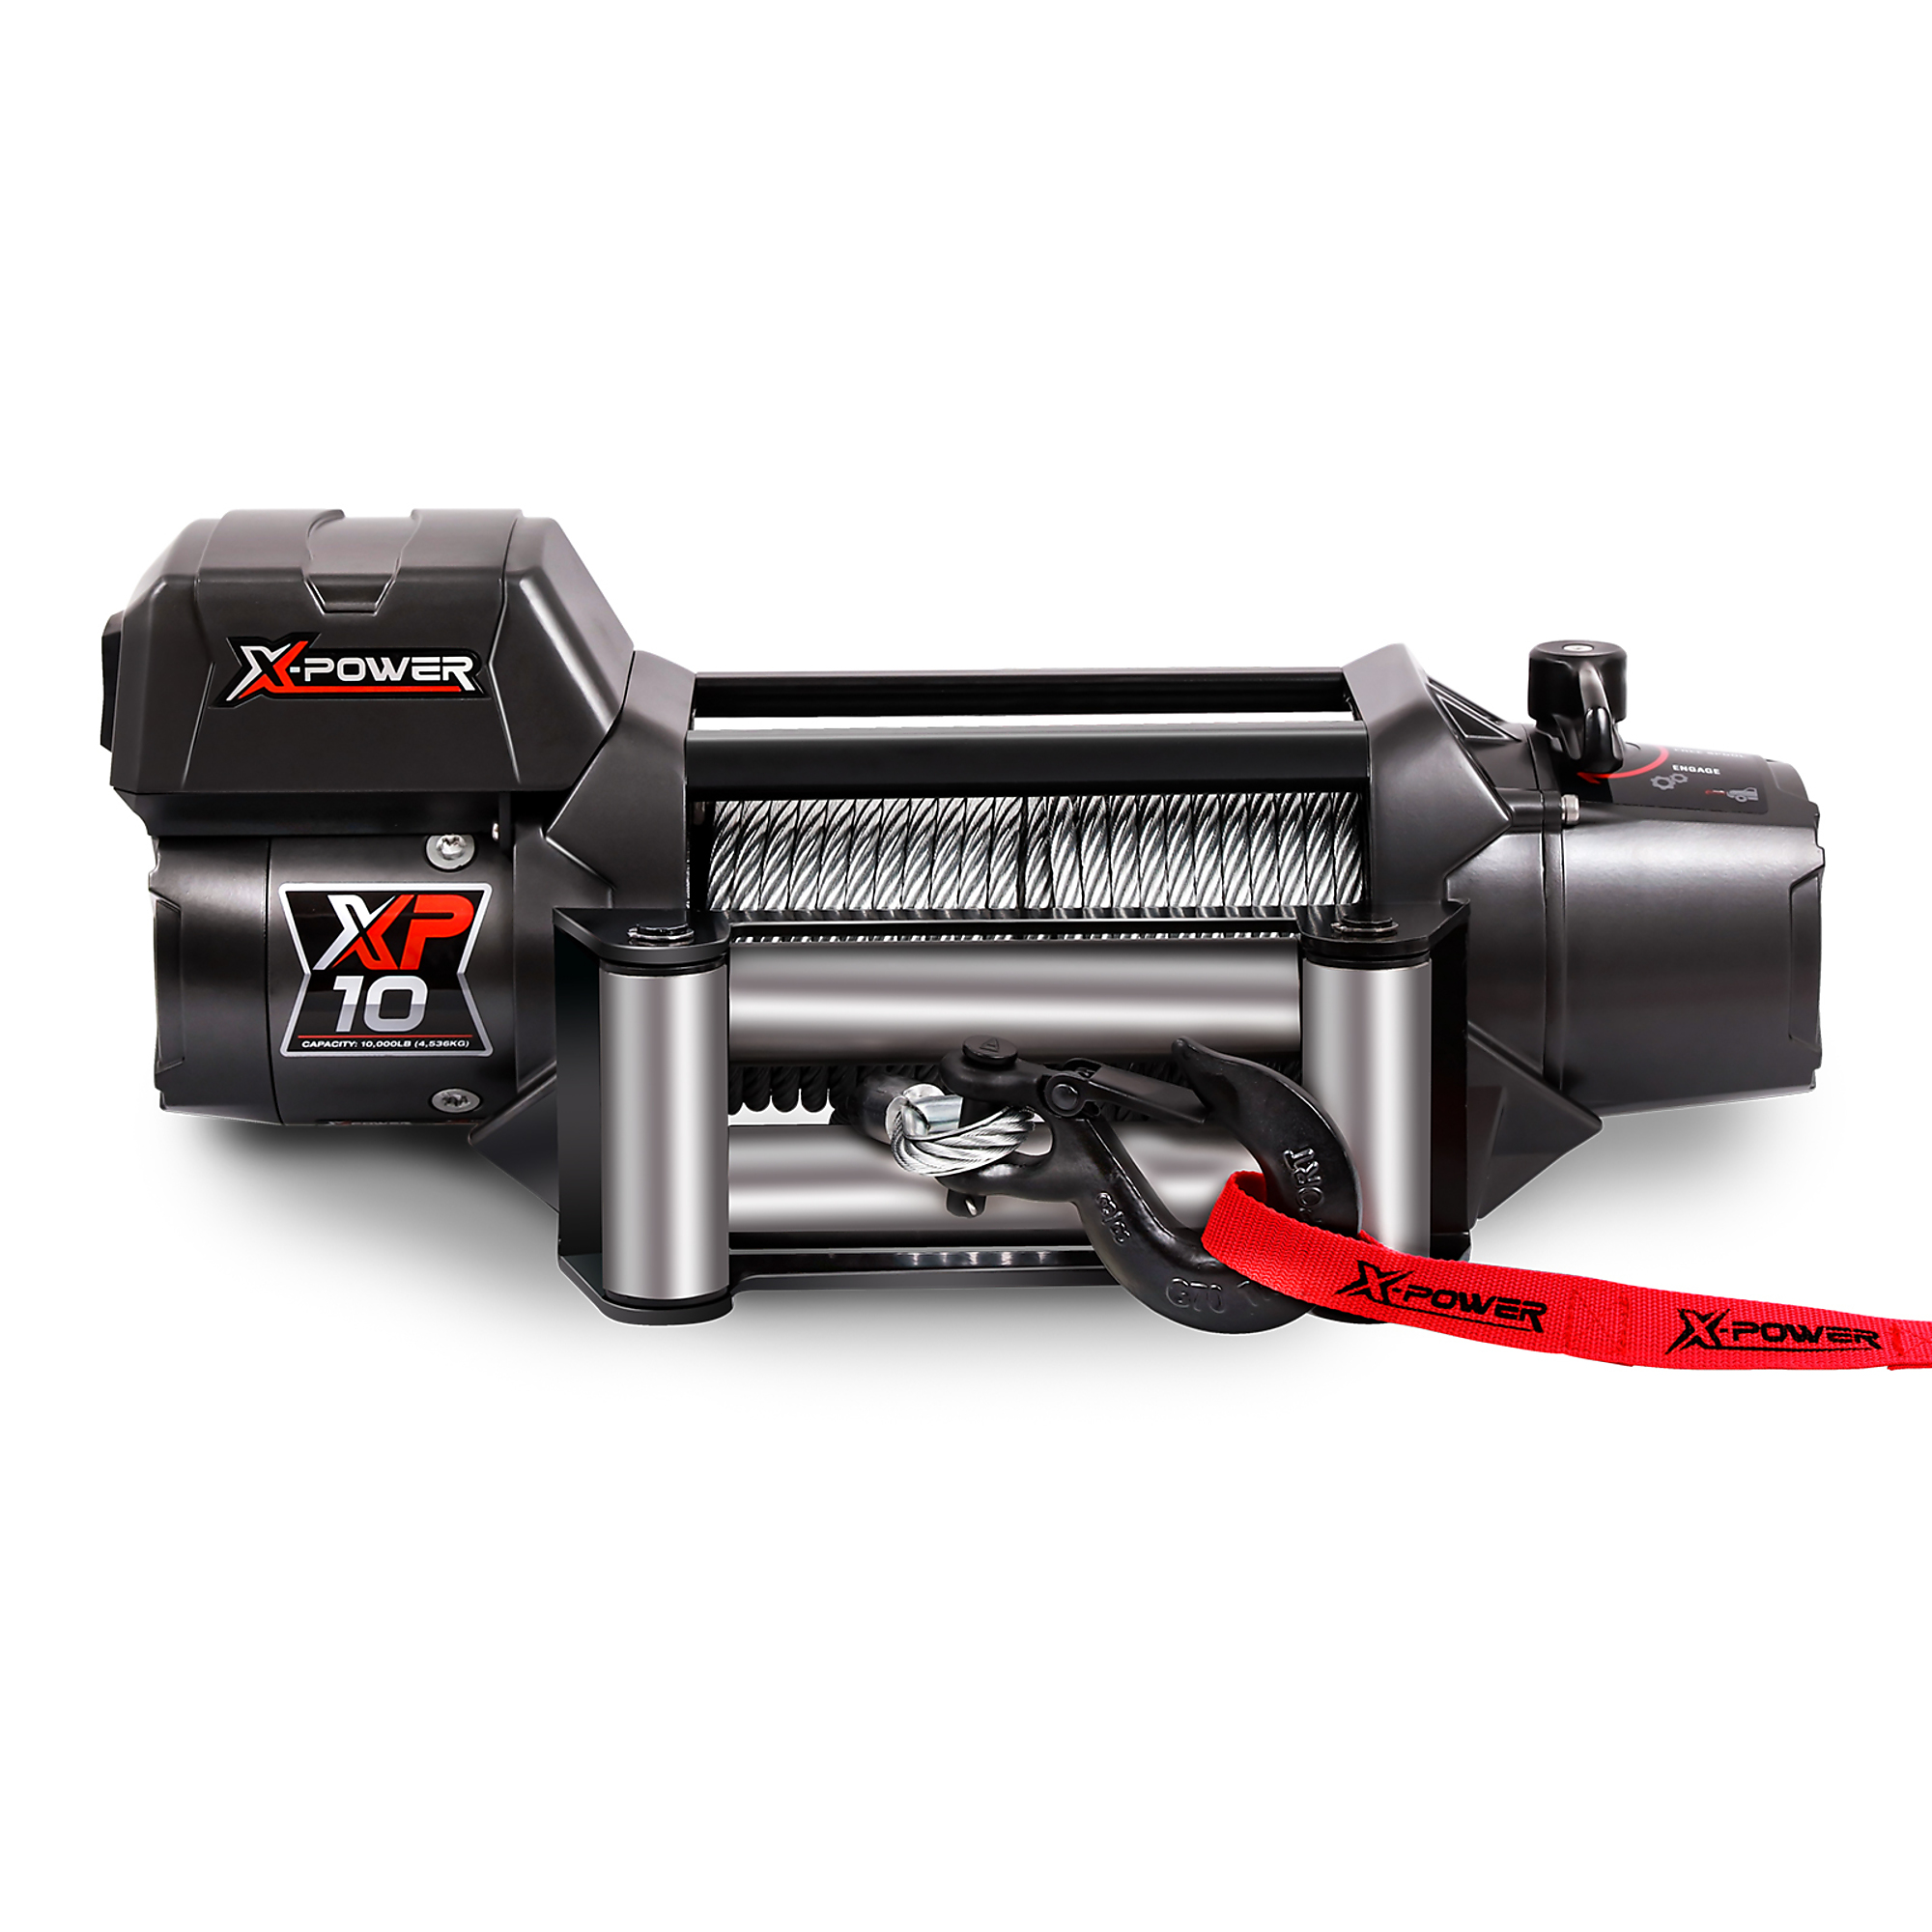 XPower, 10000 LBS. WINCH NON-INTEGRATED - STEEL, Capacity (Line Pull) 10000 lb, Model 10802007